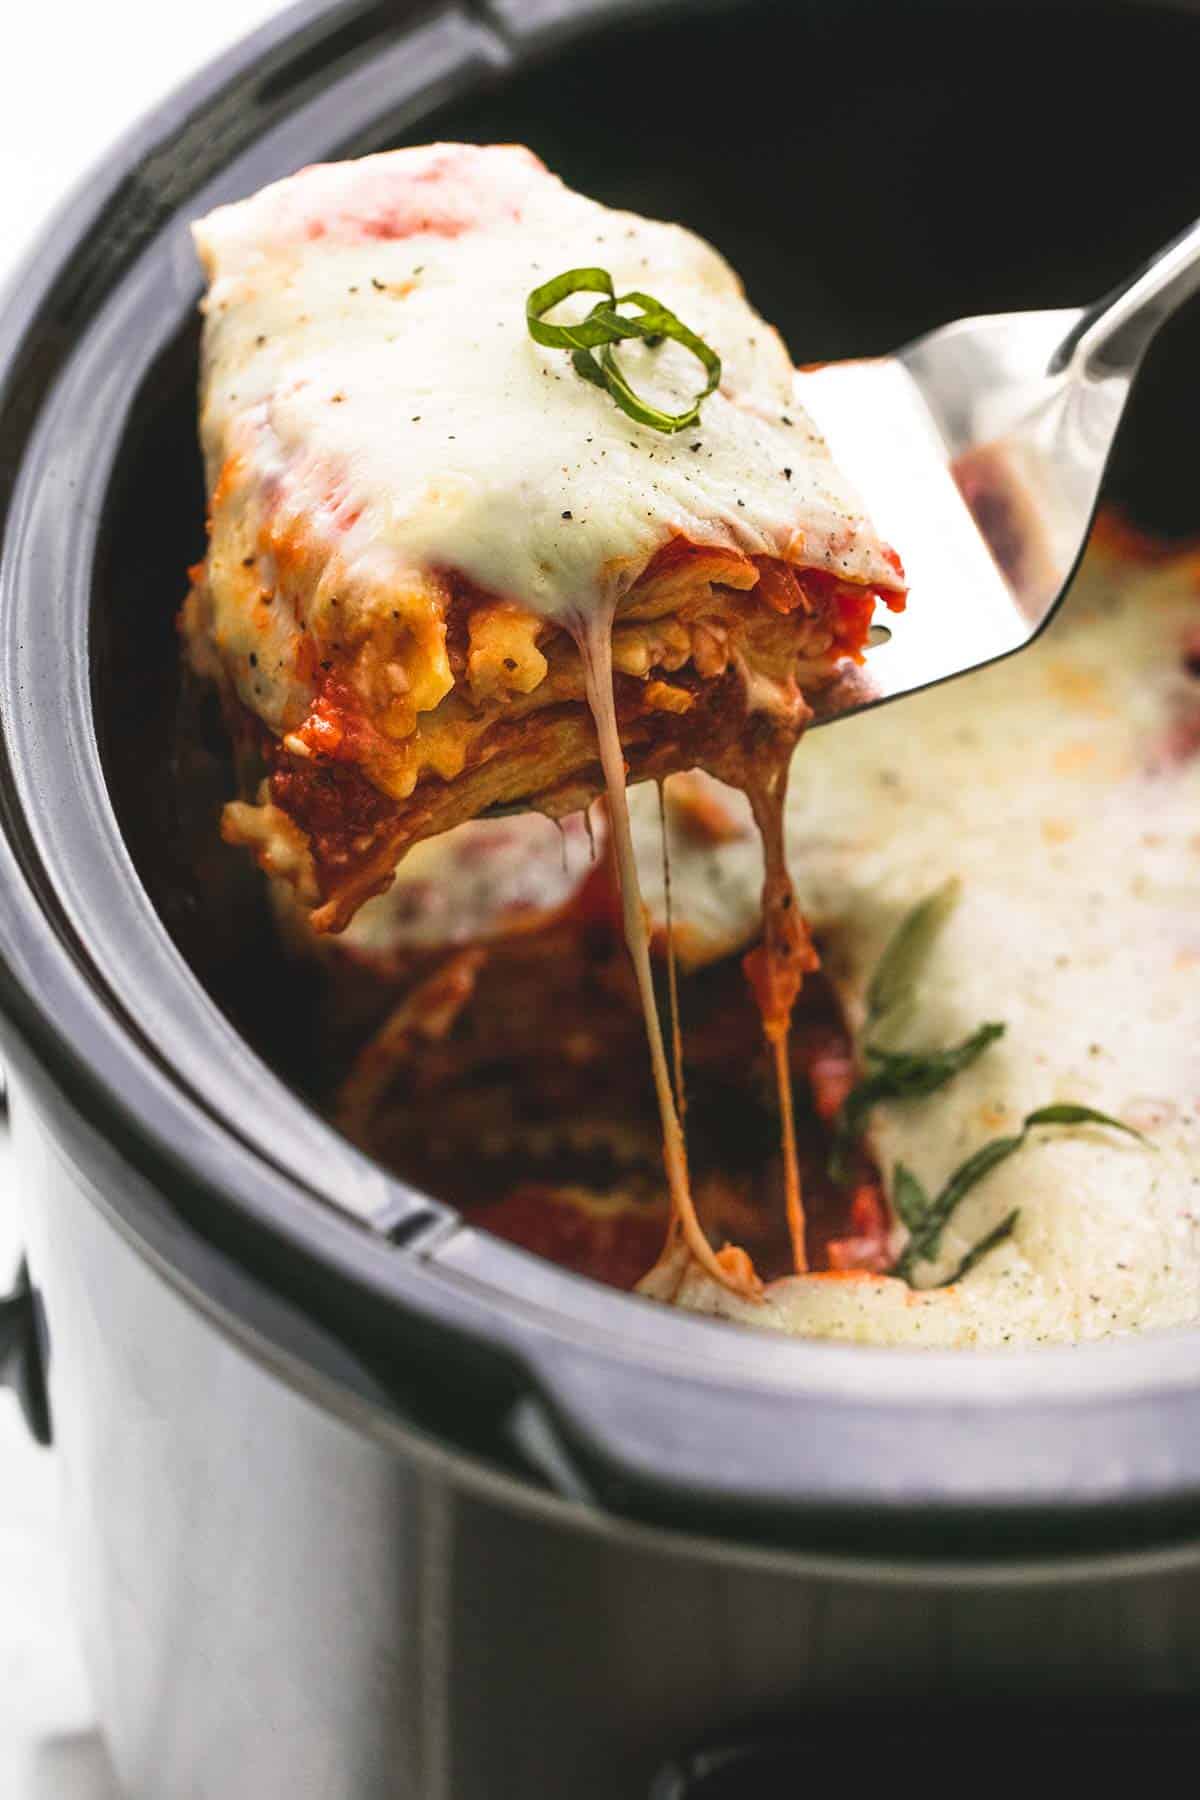 Slow Cooker Lasagna - The Magical Slow Cooker